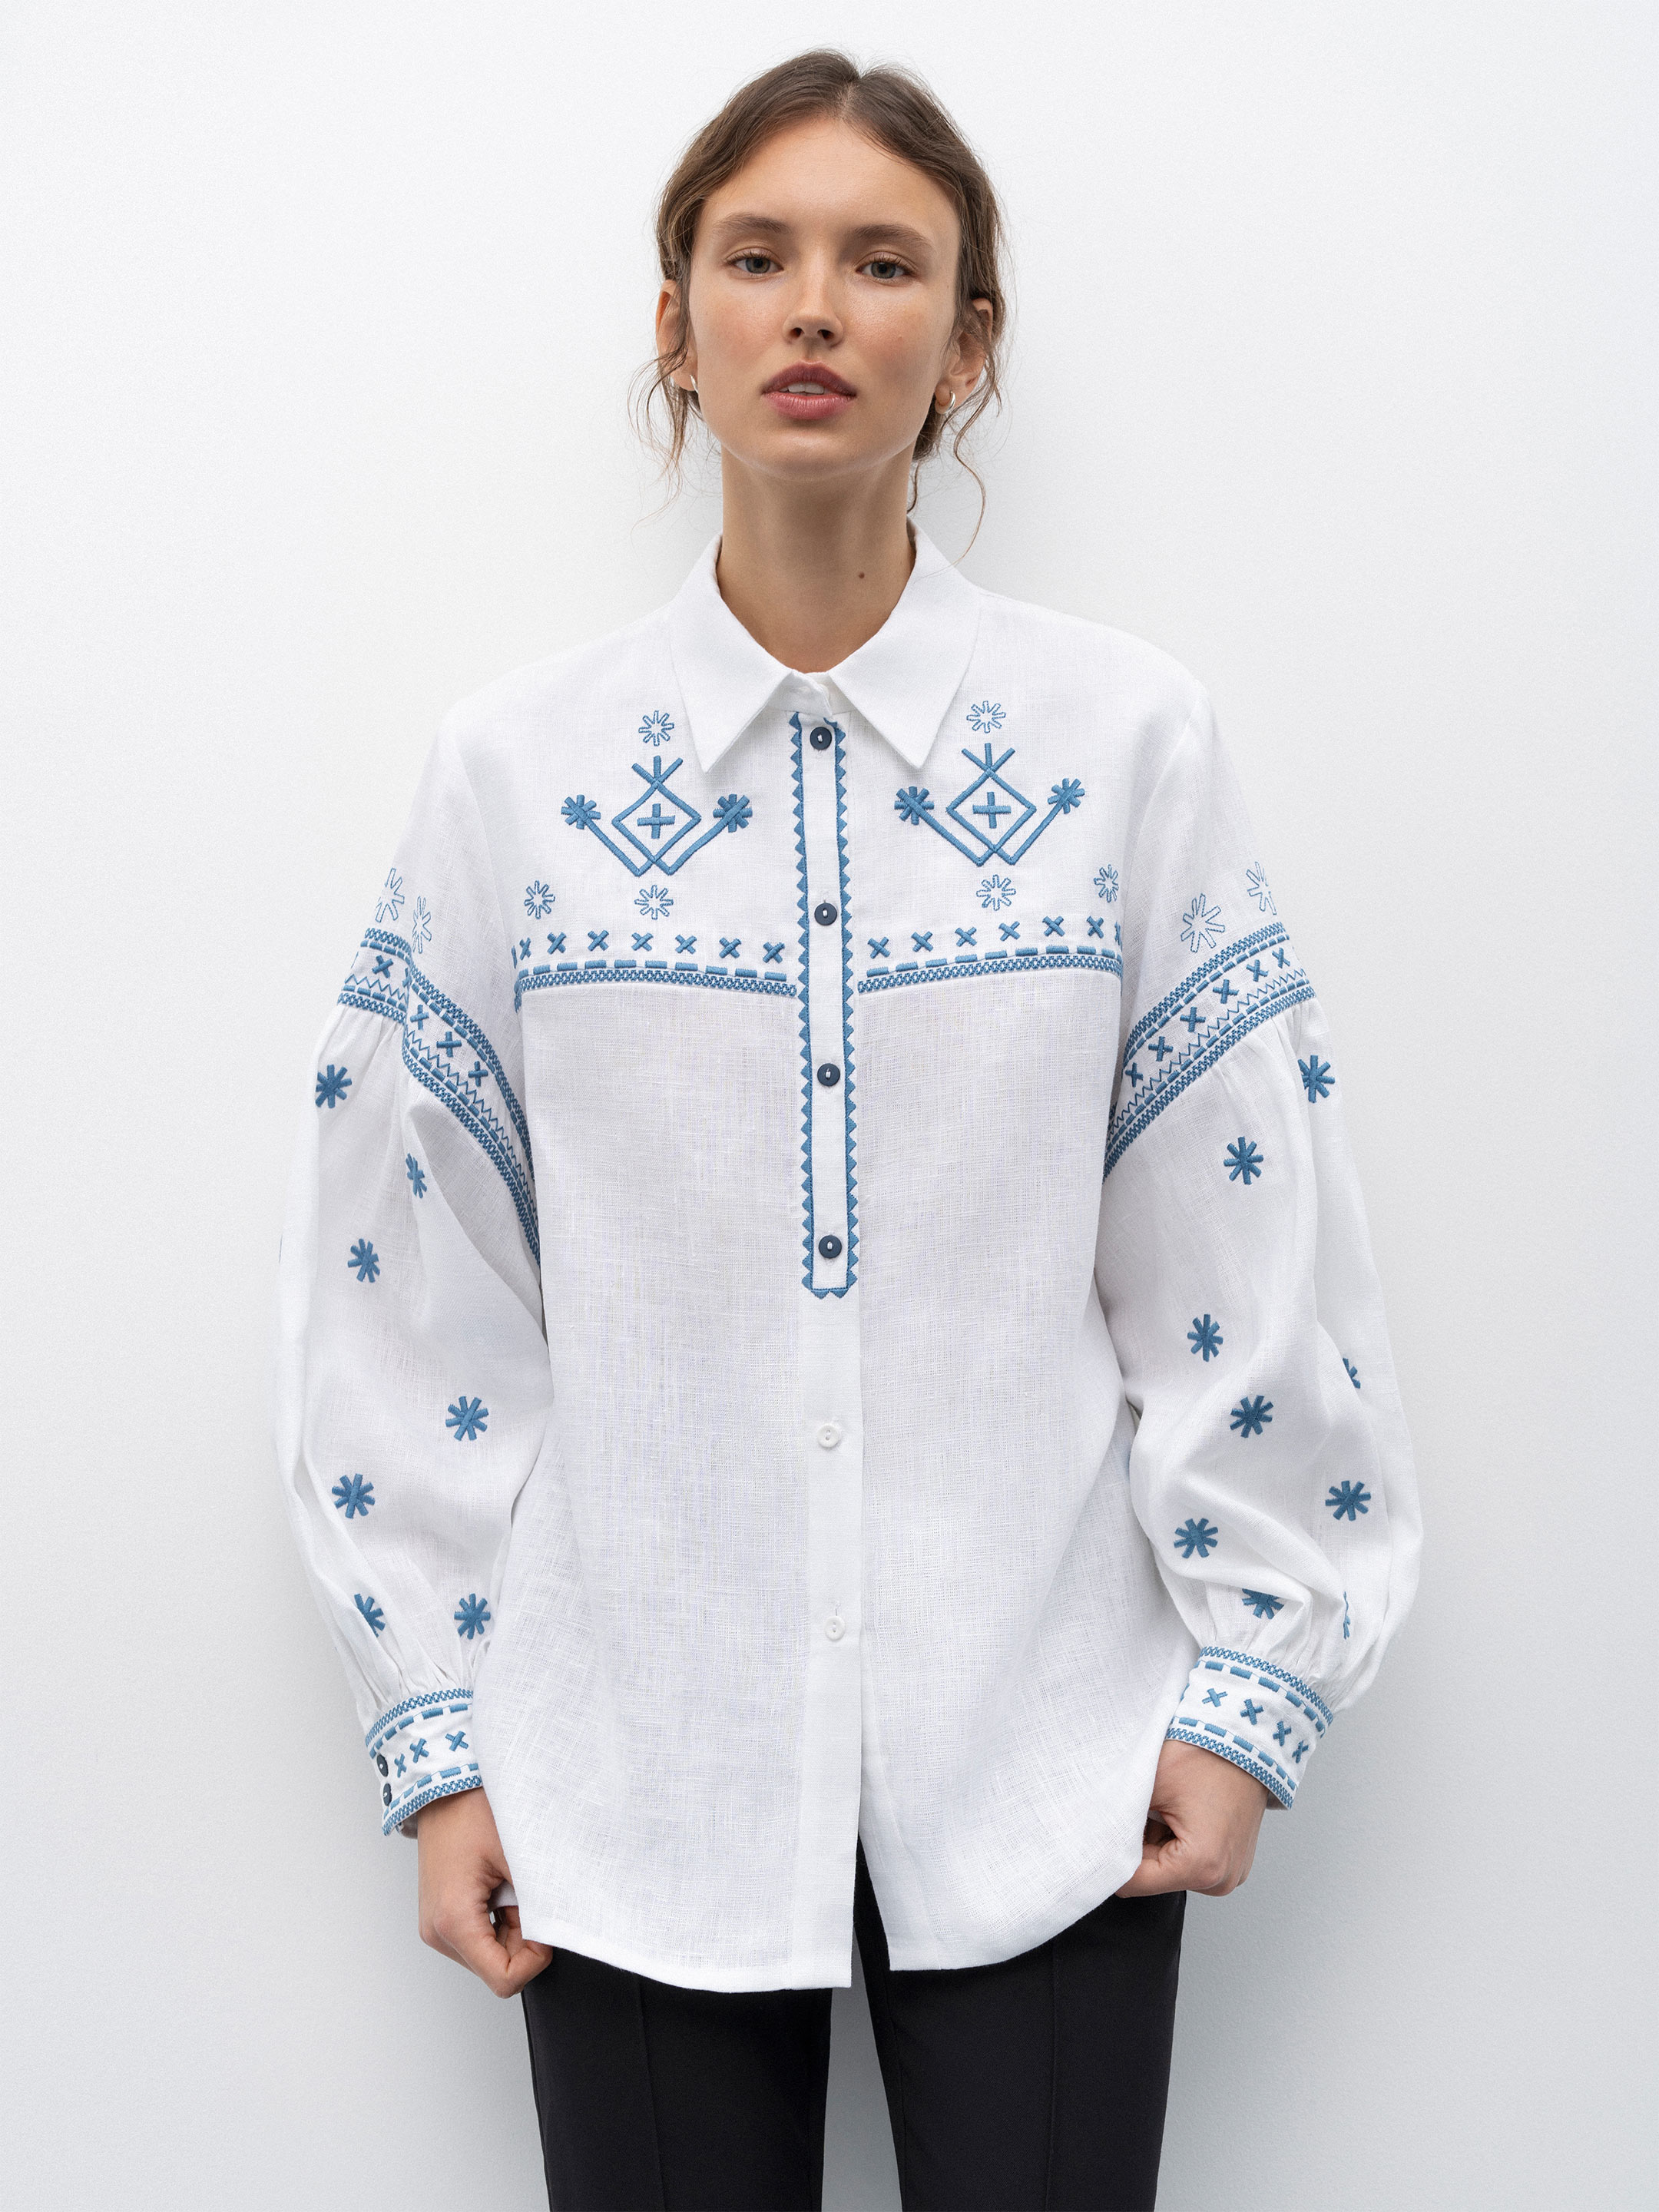 White linen shirt with embroidery Tsvit Syniy - photo 2